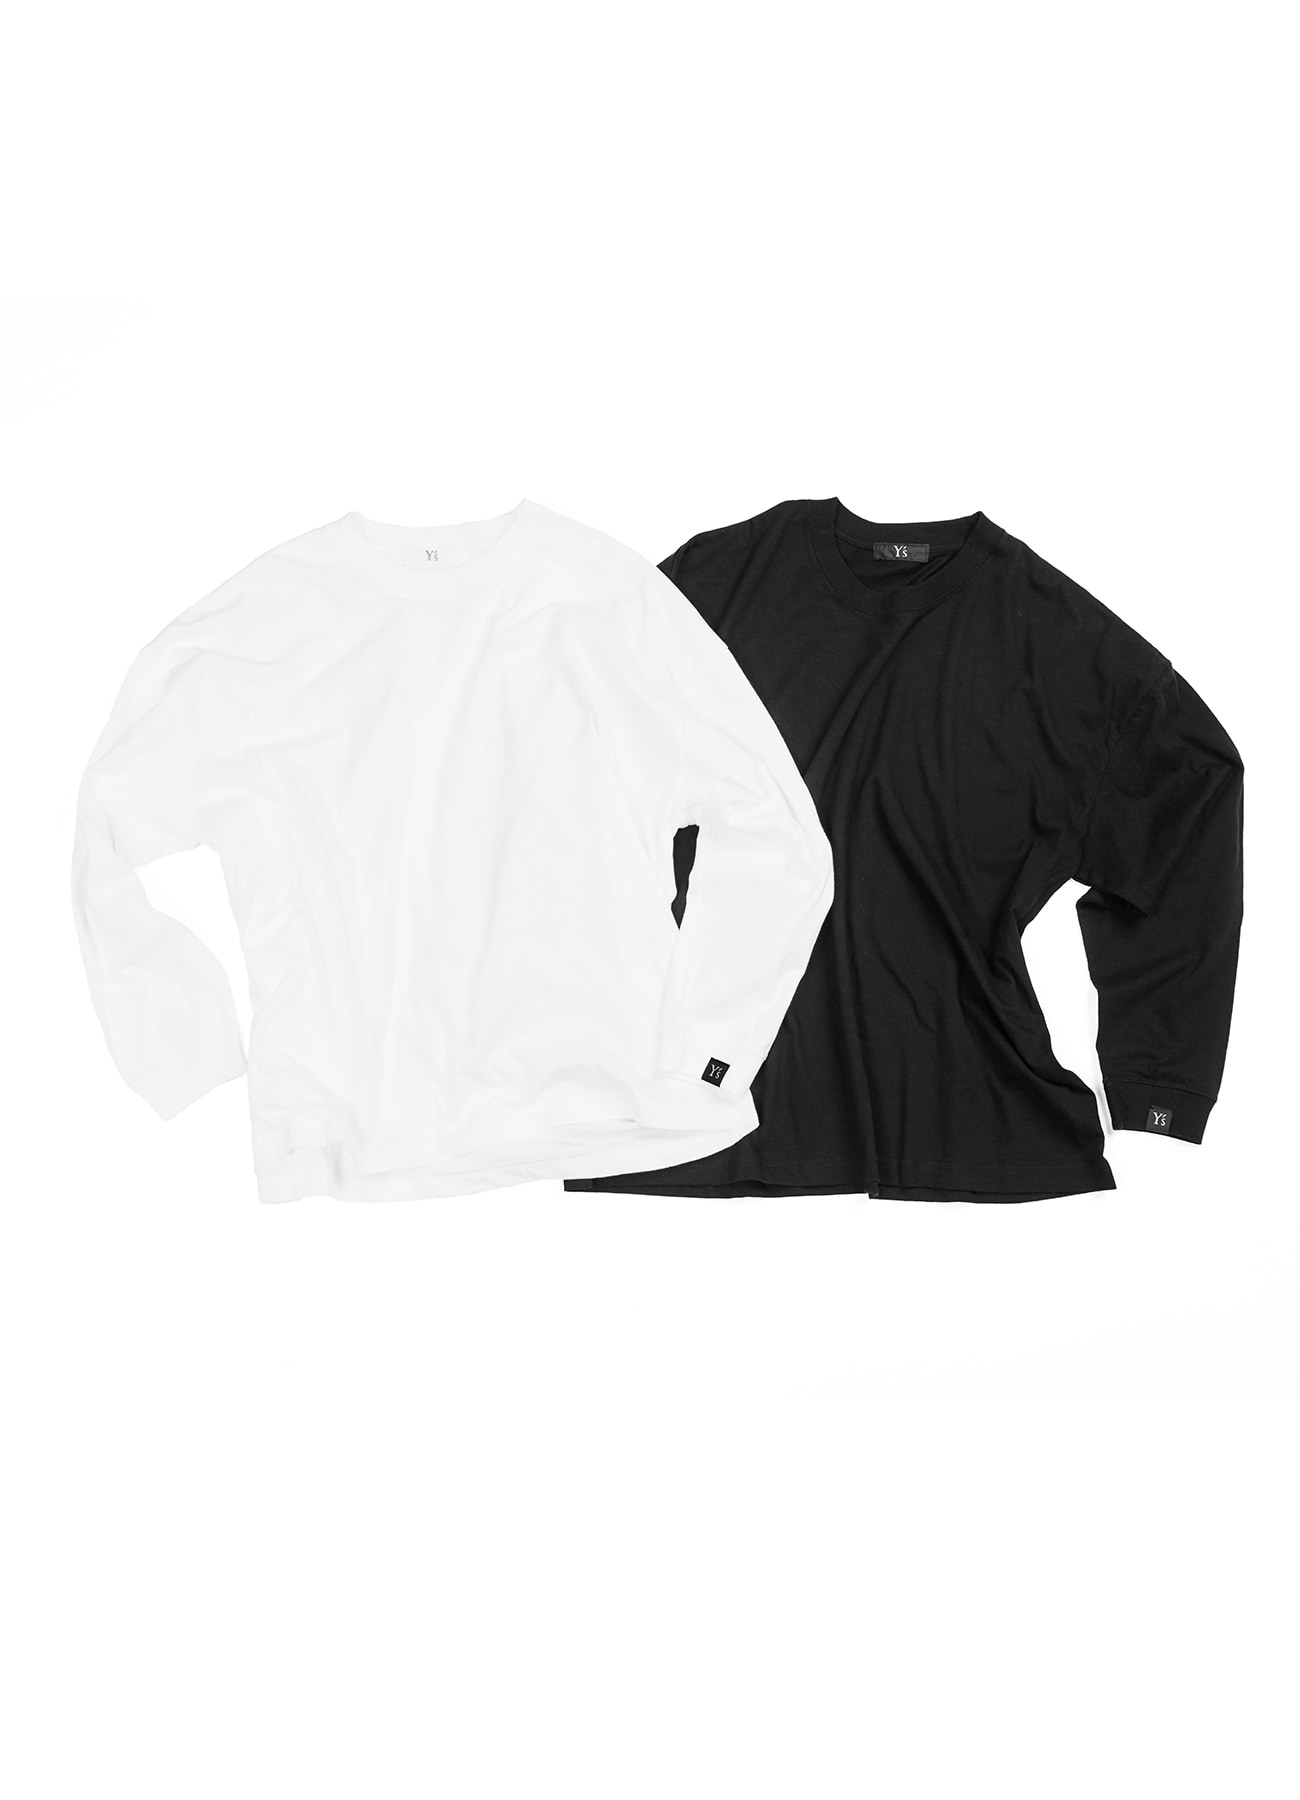 Online EXCLUSIVE-Y's logo Long sleeve T-shirts (Wide) (S Black 